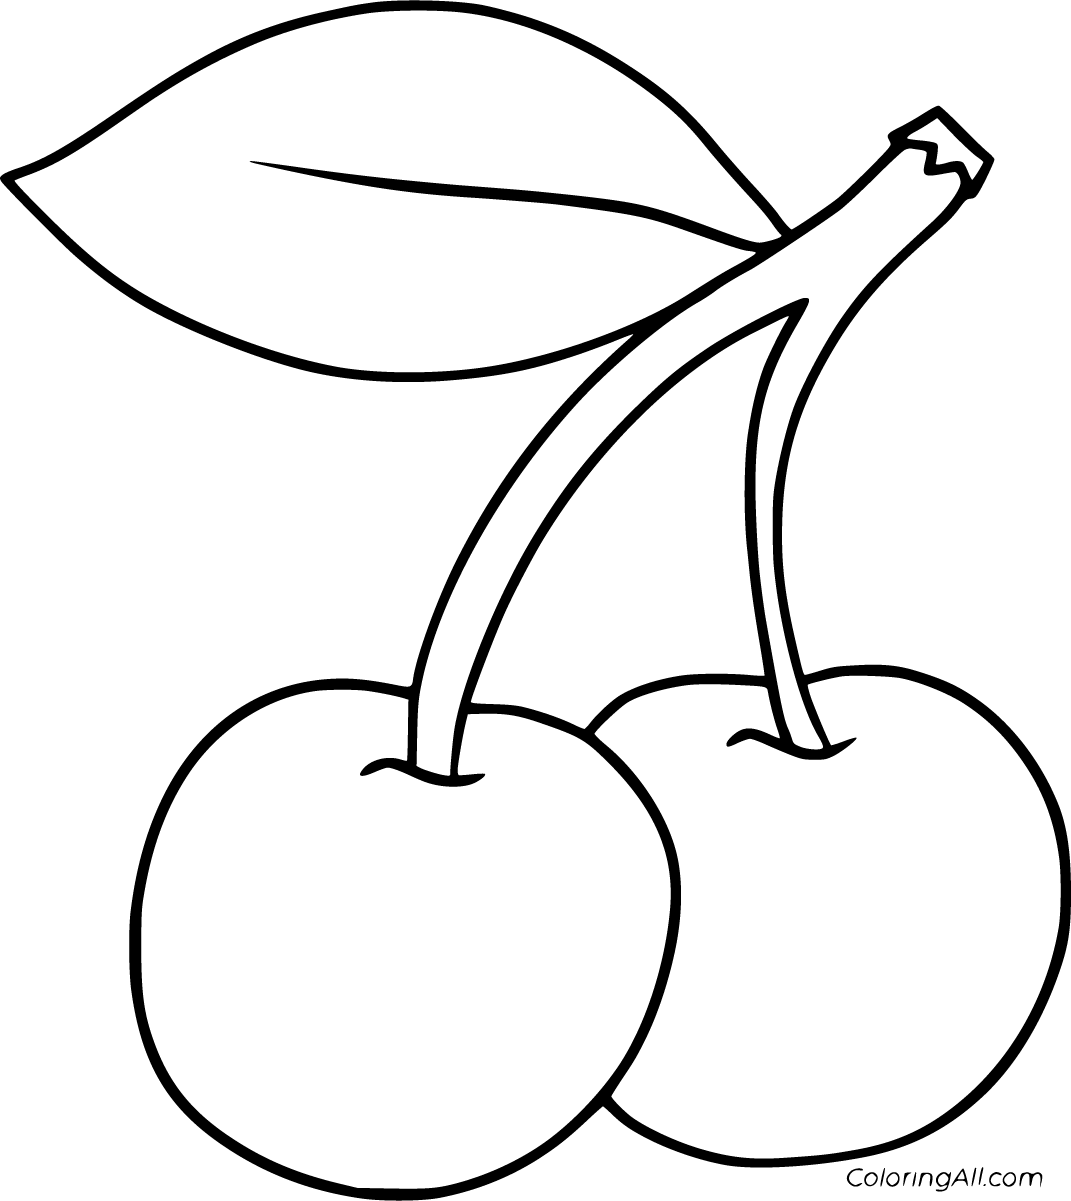 Free Coloring Pages Of Cherries